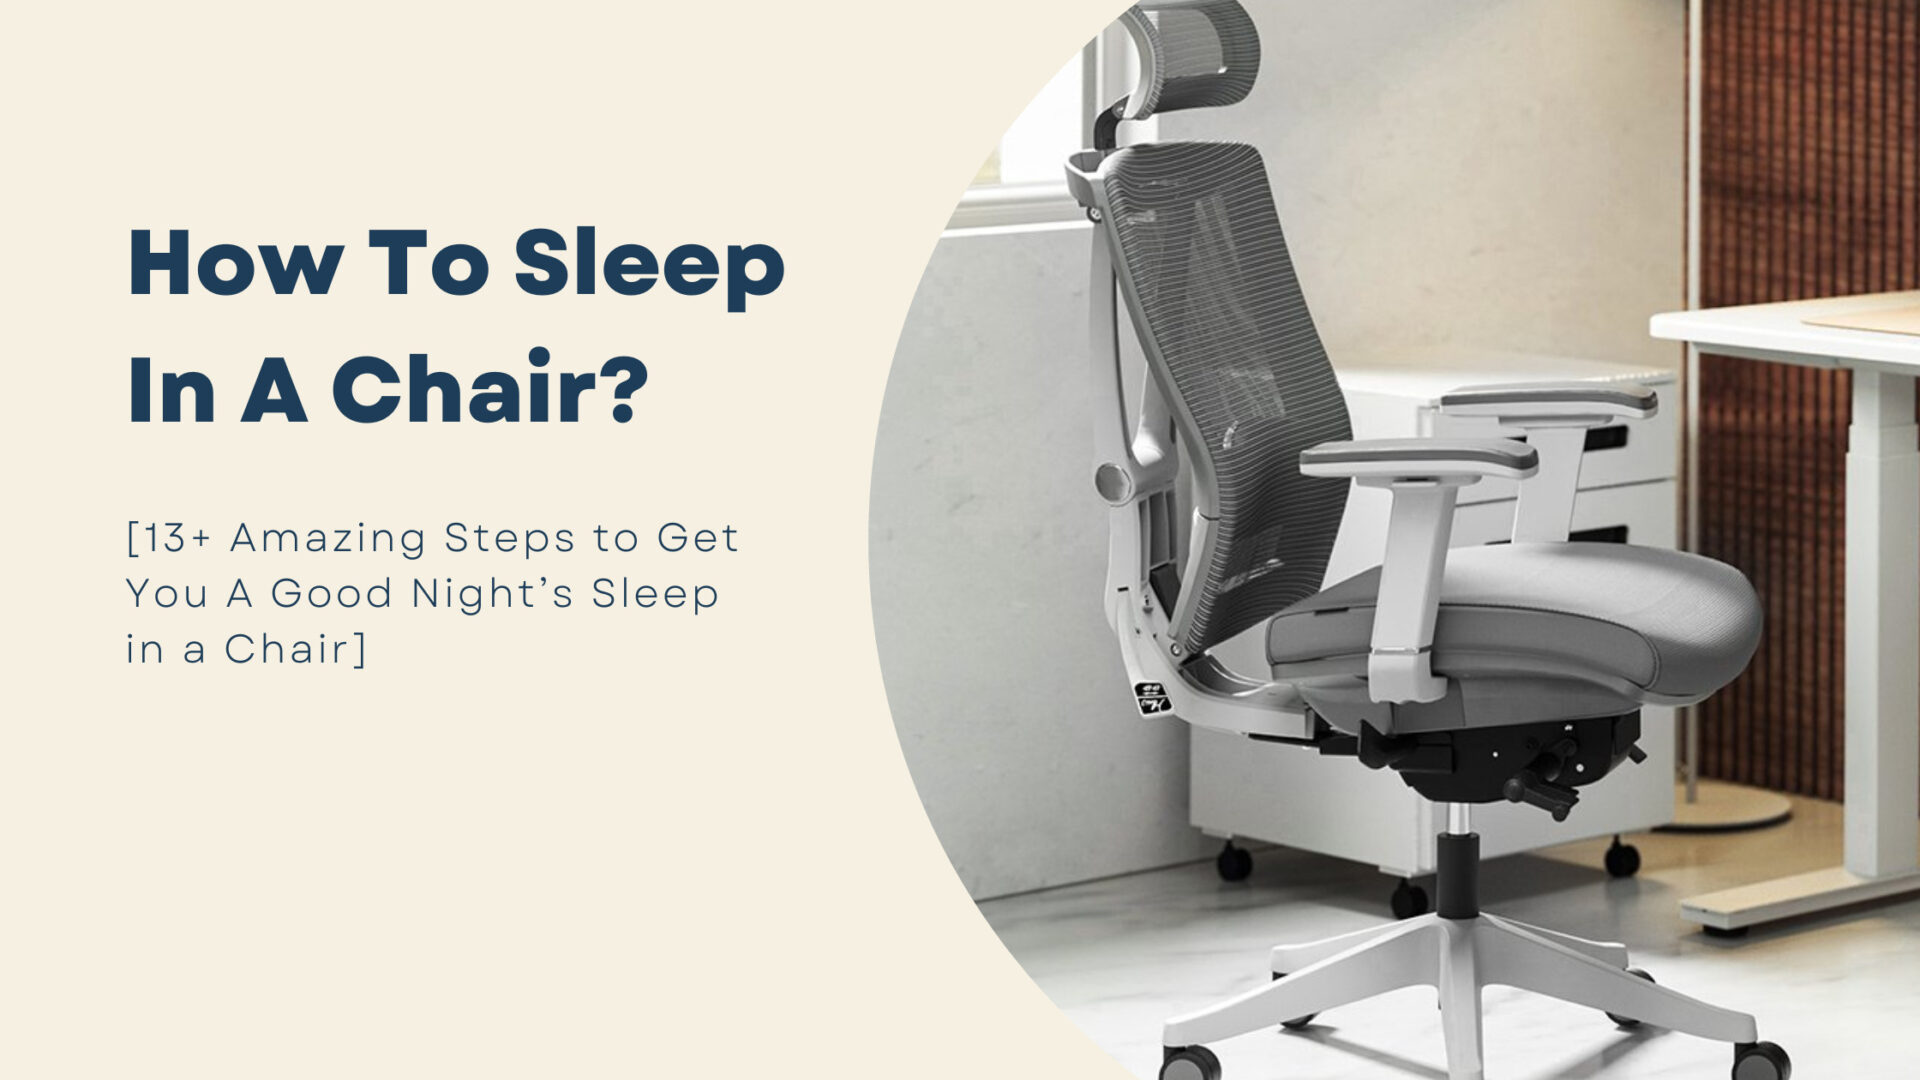 How To Sleep In A Chair